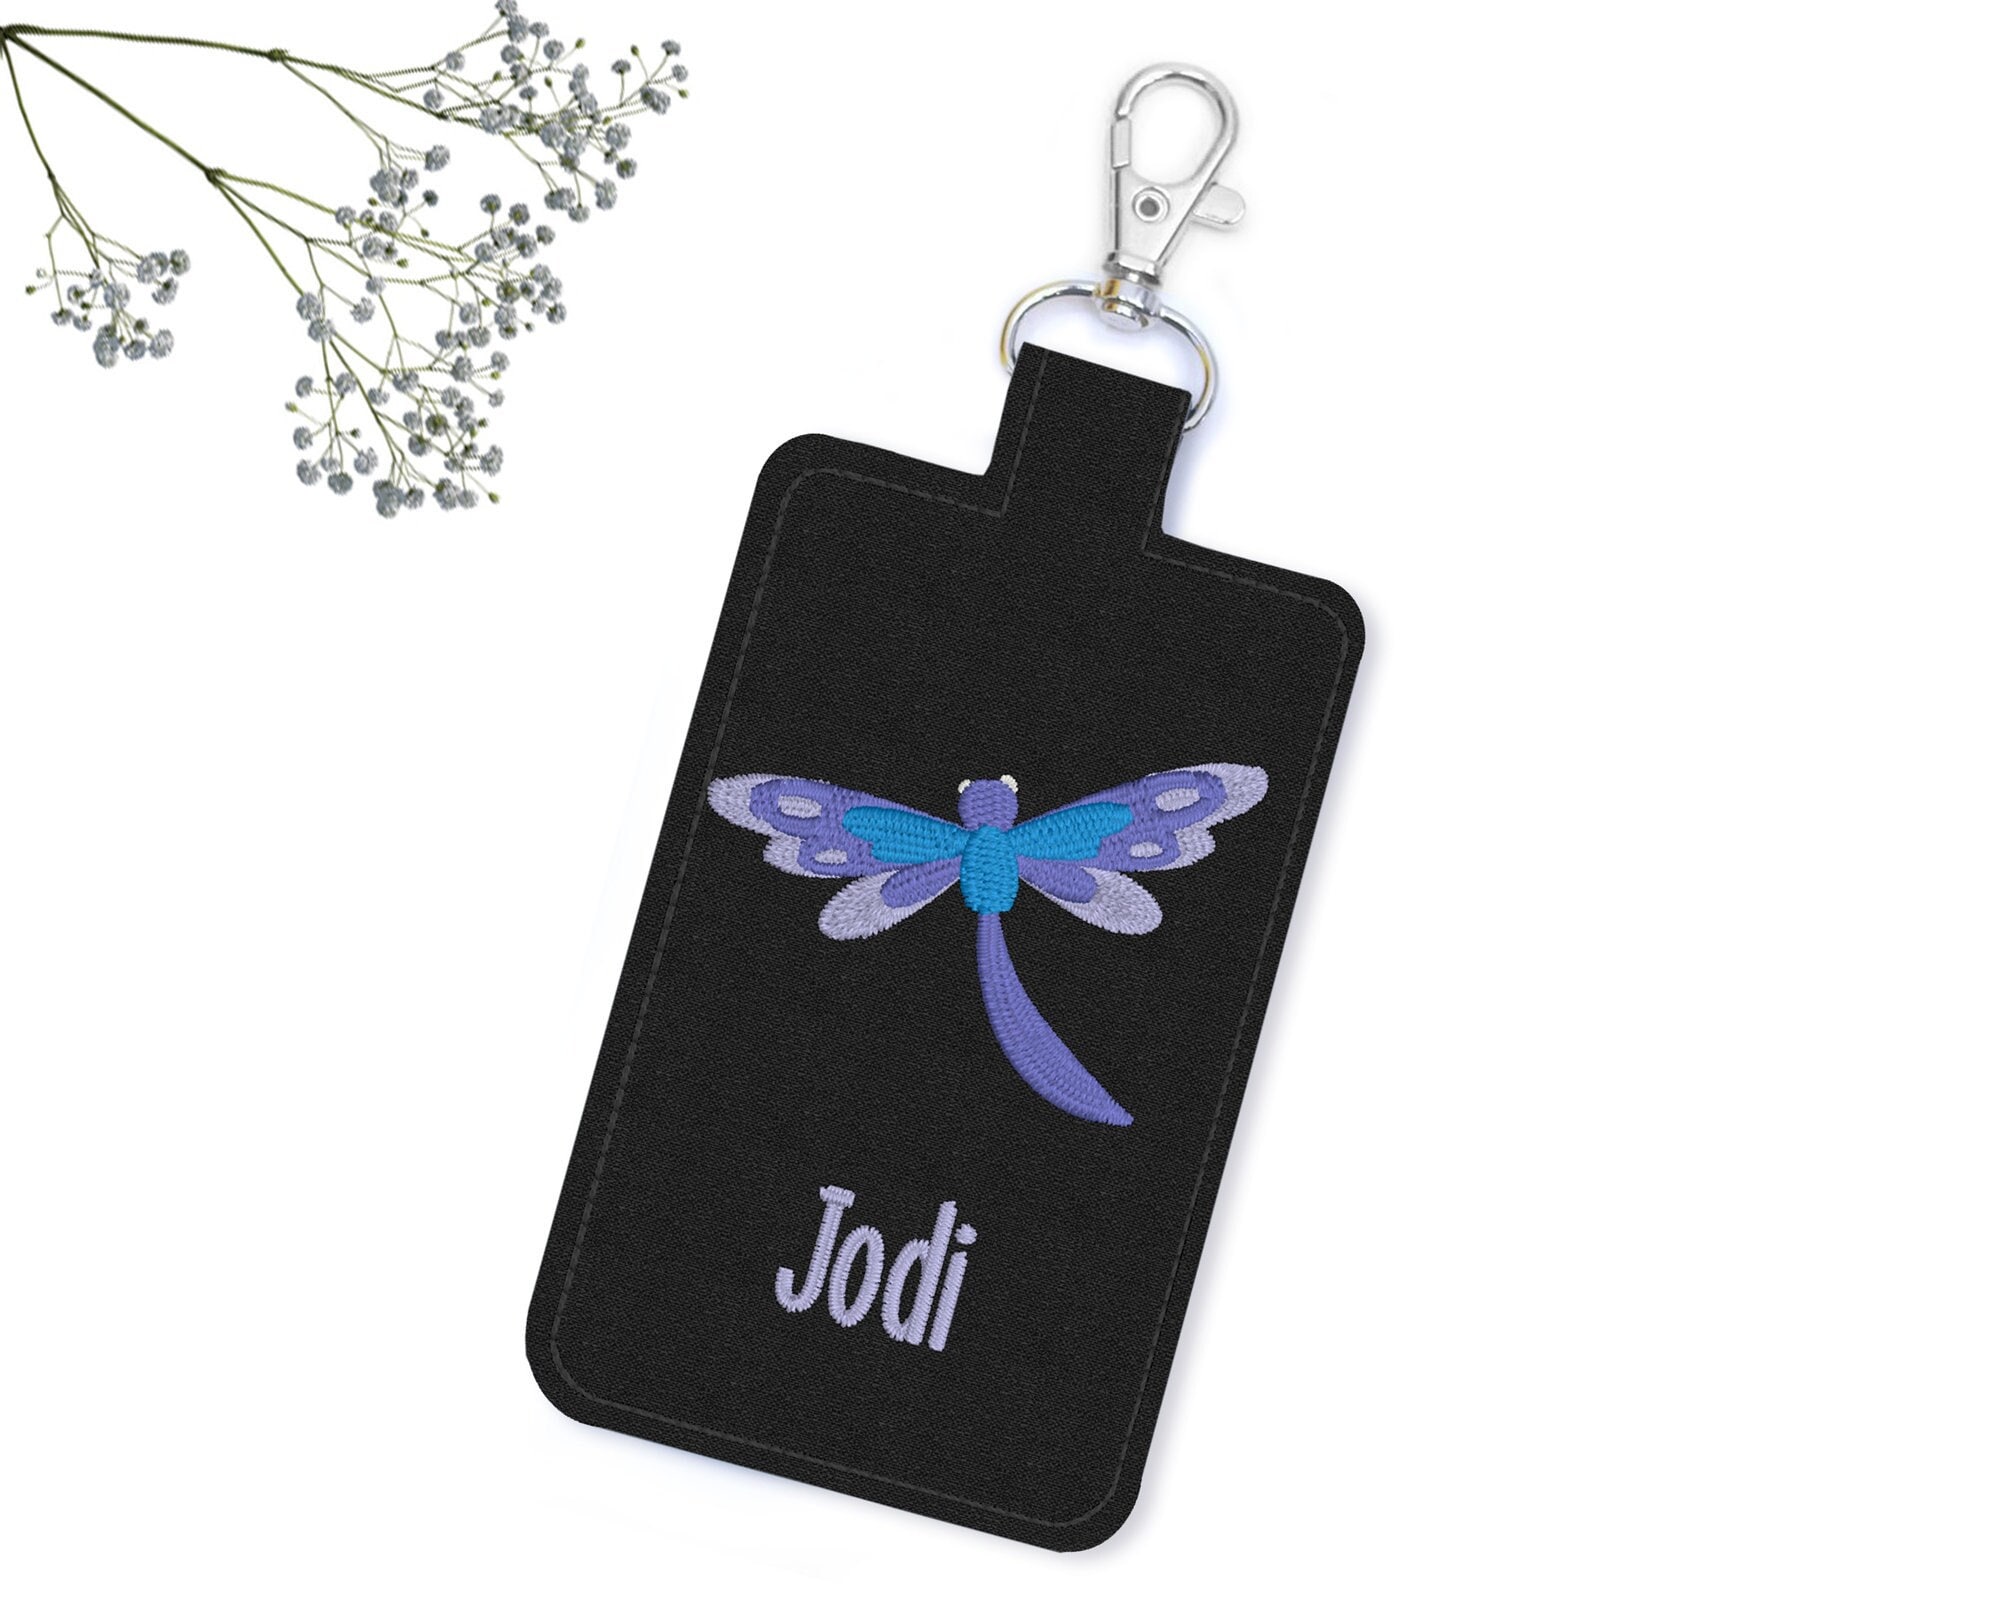 ID Badge Holder, Dragonfly Badge Holder, Personalized Vertical ID Card Protector Case, Lanyard Accessory, Teacher Gift